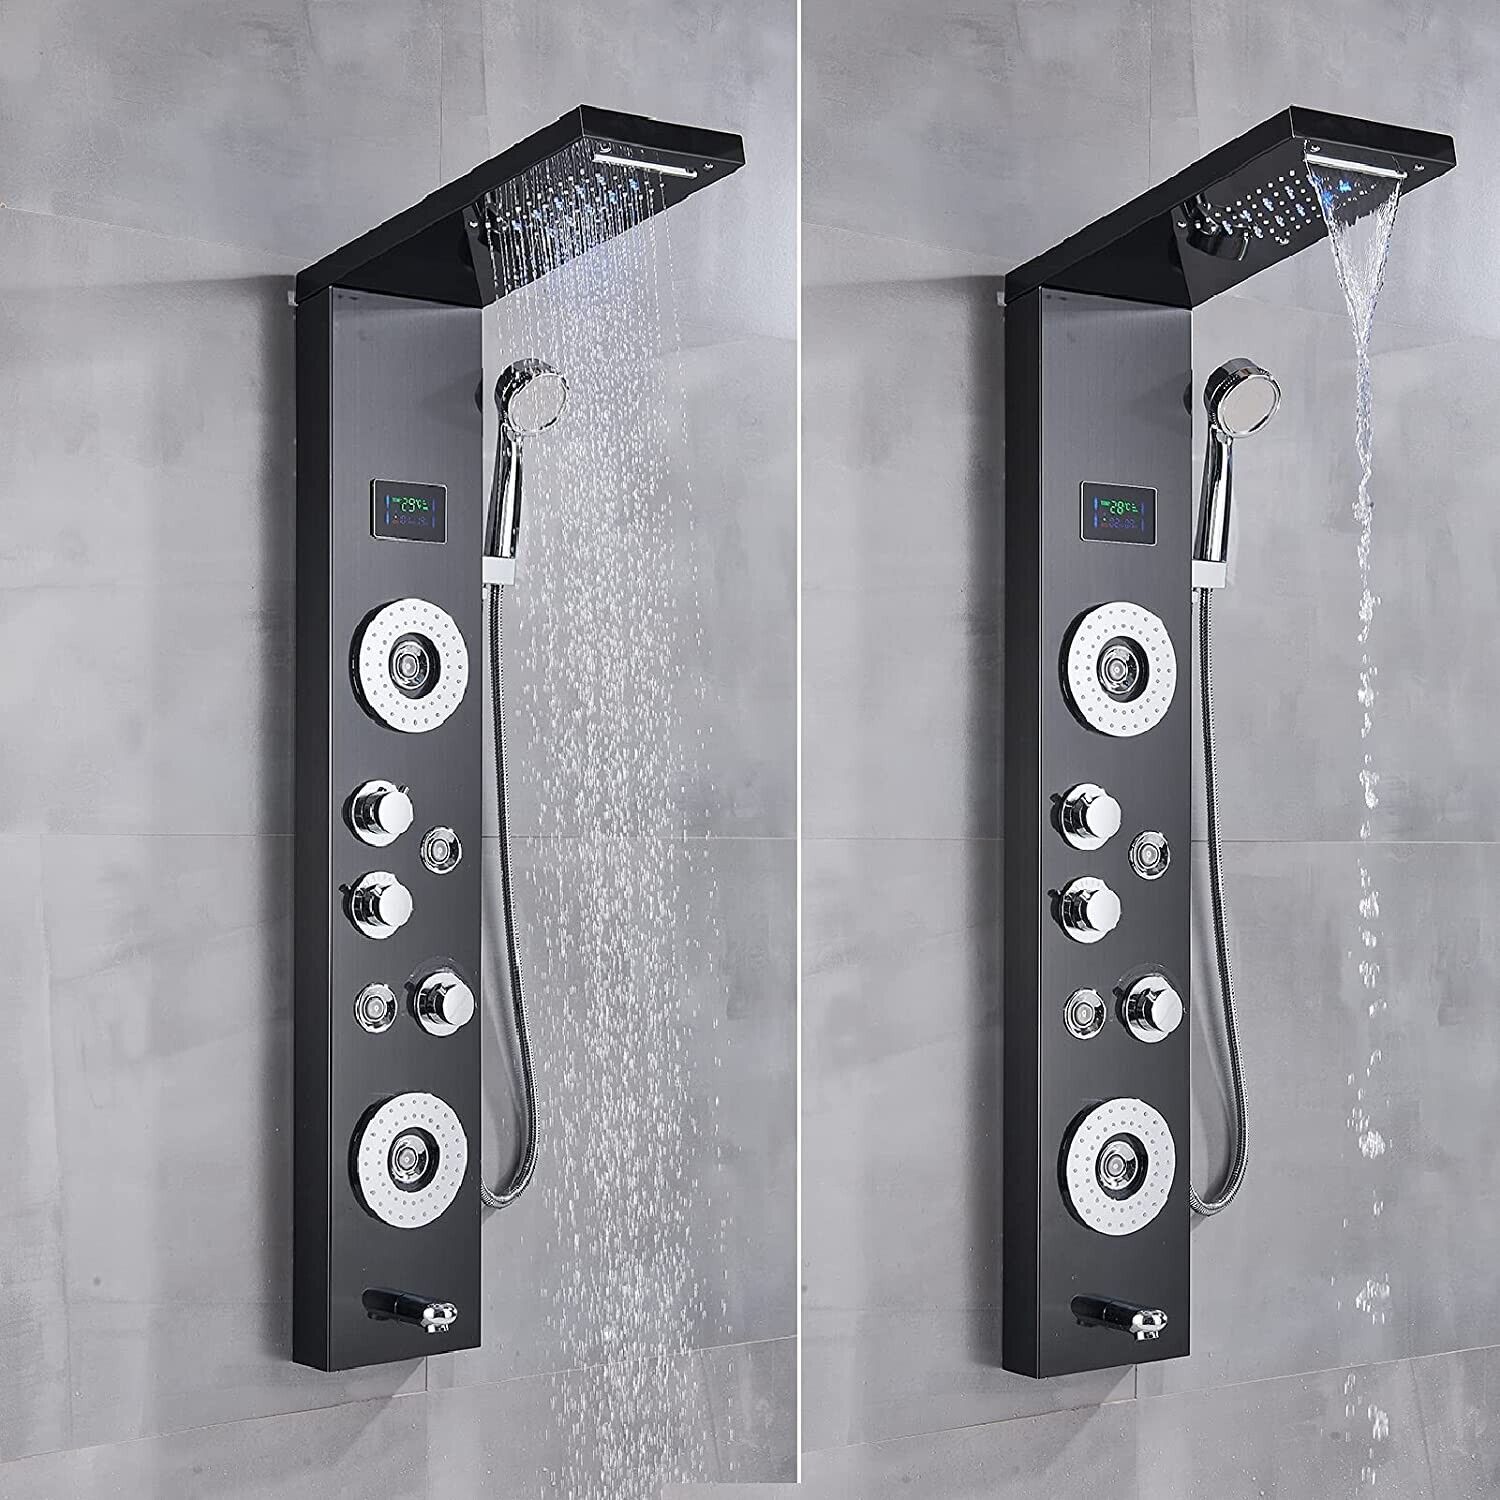 Shower Panel Tower System, 5 in 1 Stainless Steel LED Shower Column, Rainfall & Waterfall Head, Massage Jets Spa Pallazi